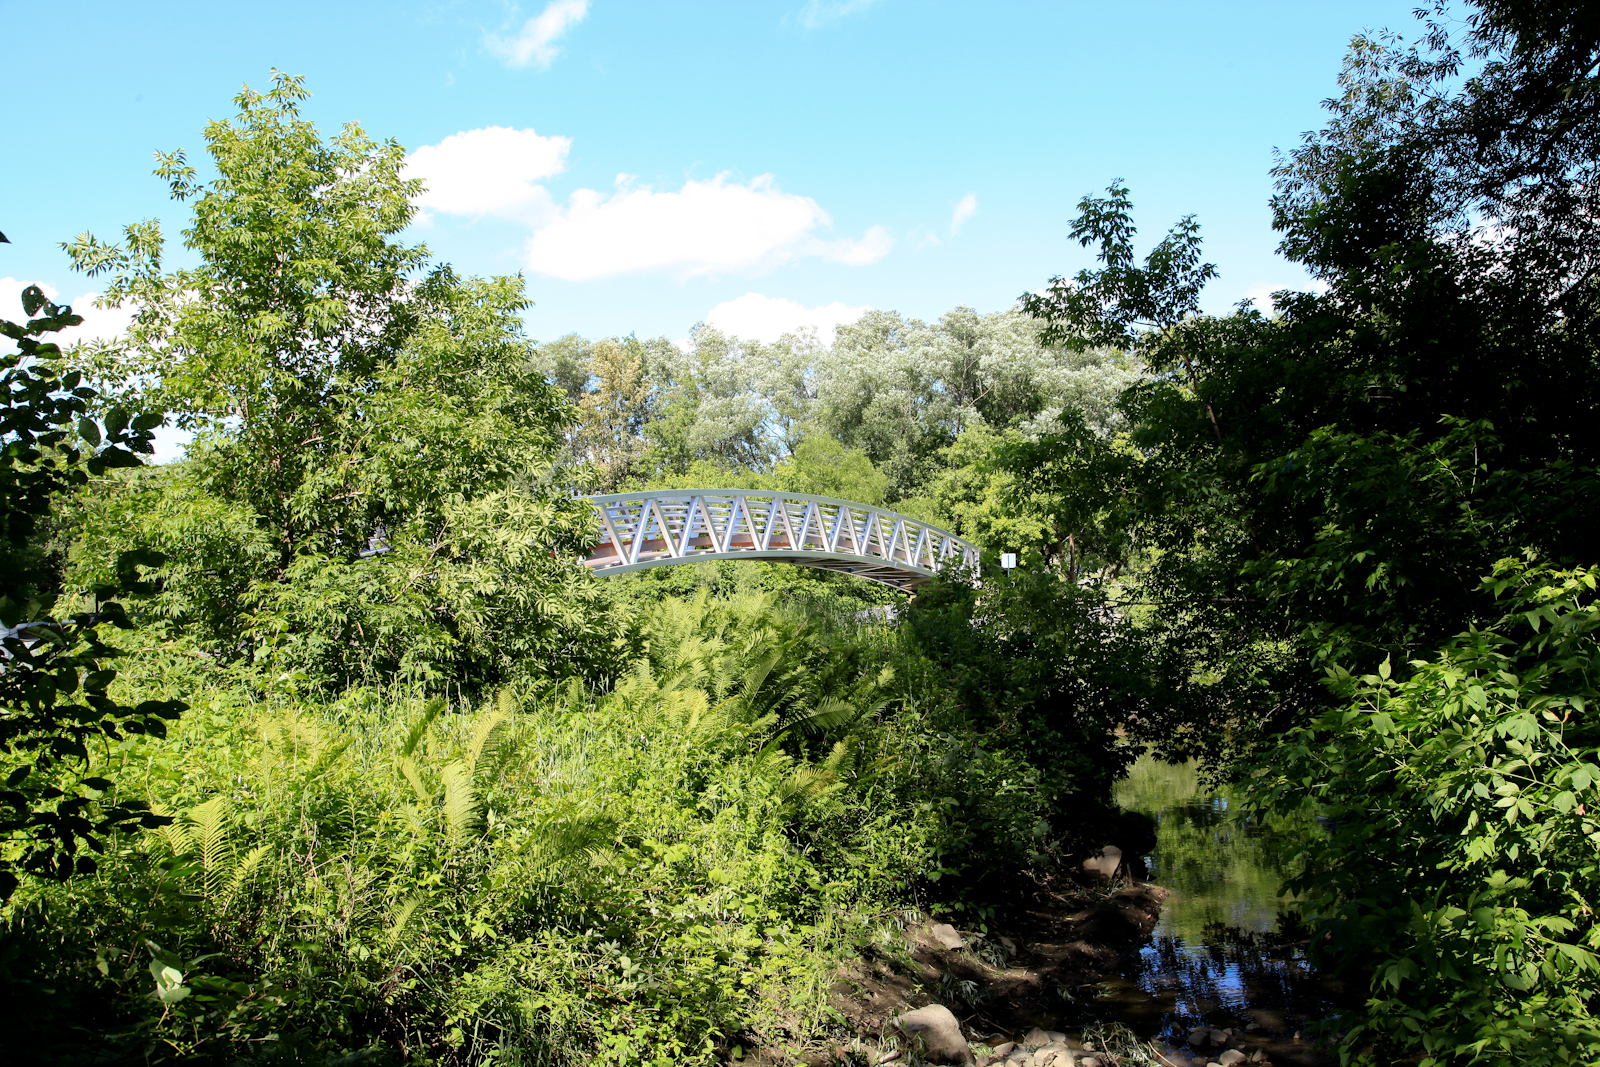 Arched aluminum footbridge crossing over lake and forest